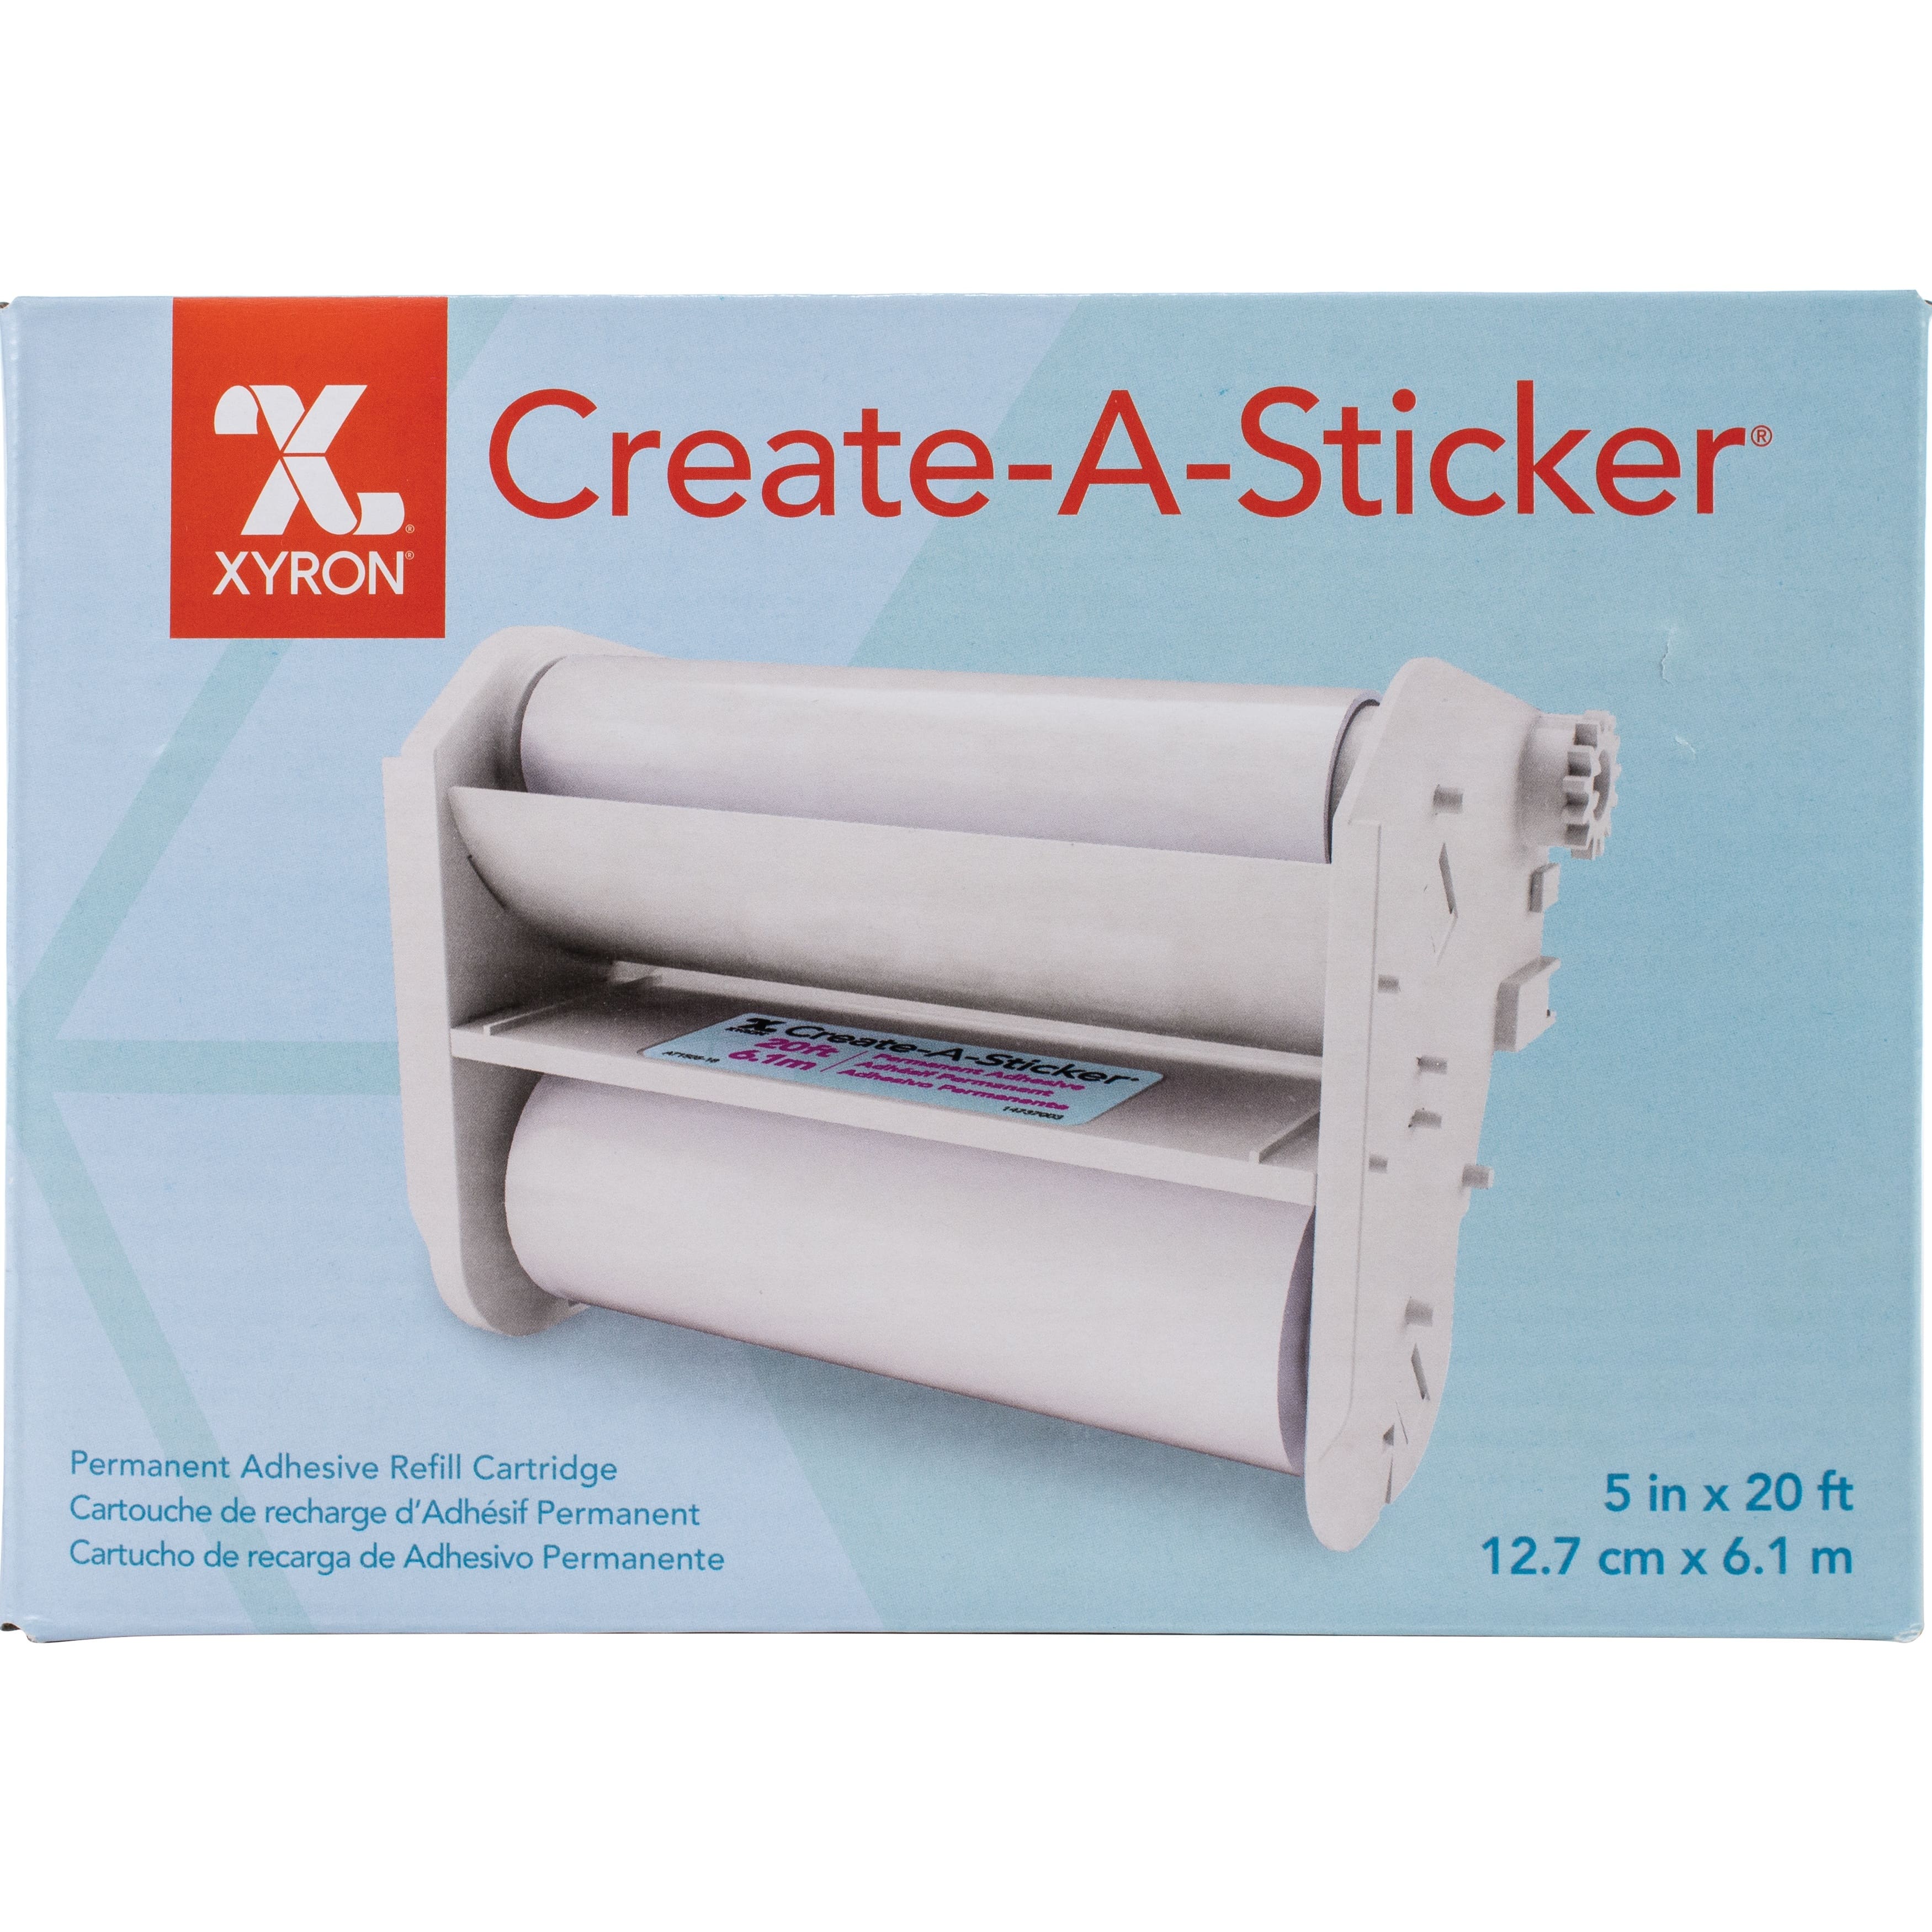 Xyron Create A Sticker Model 500 with Cartridge 